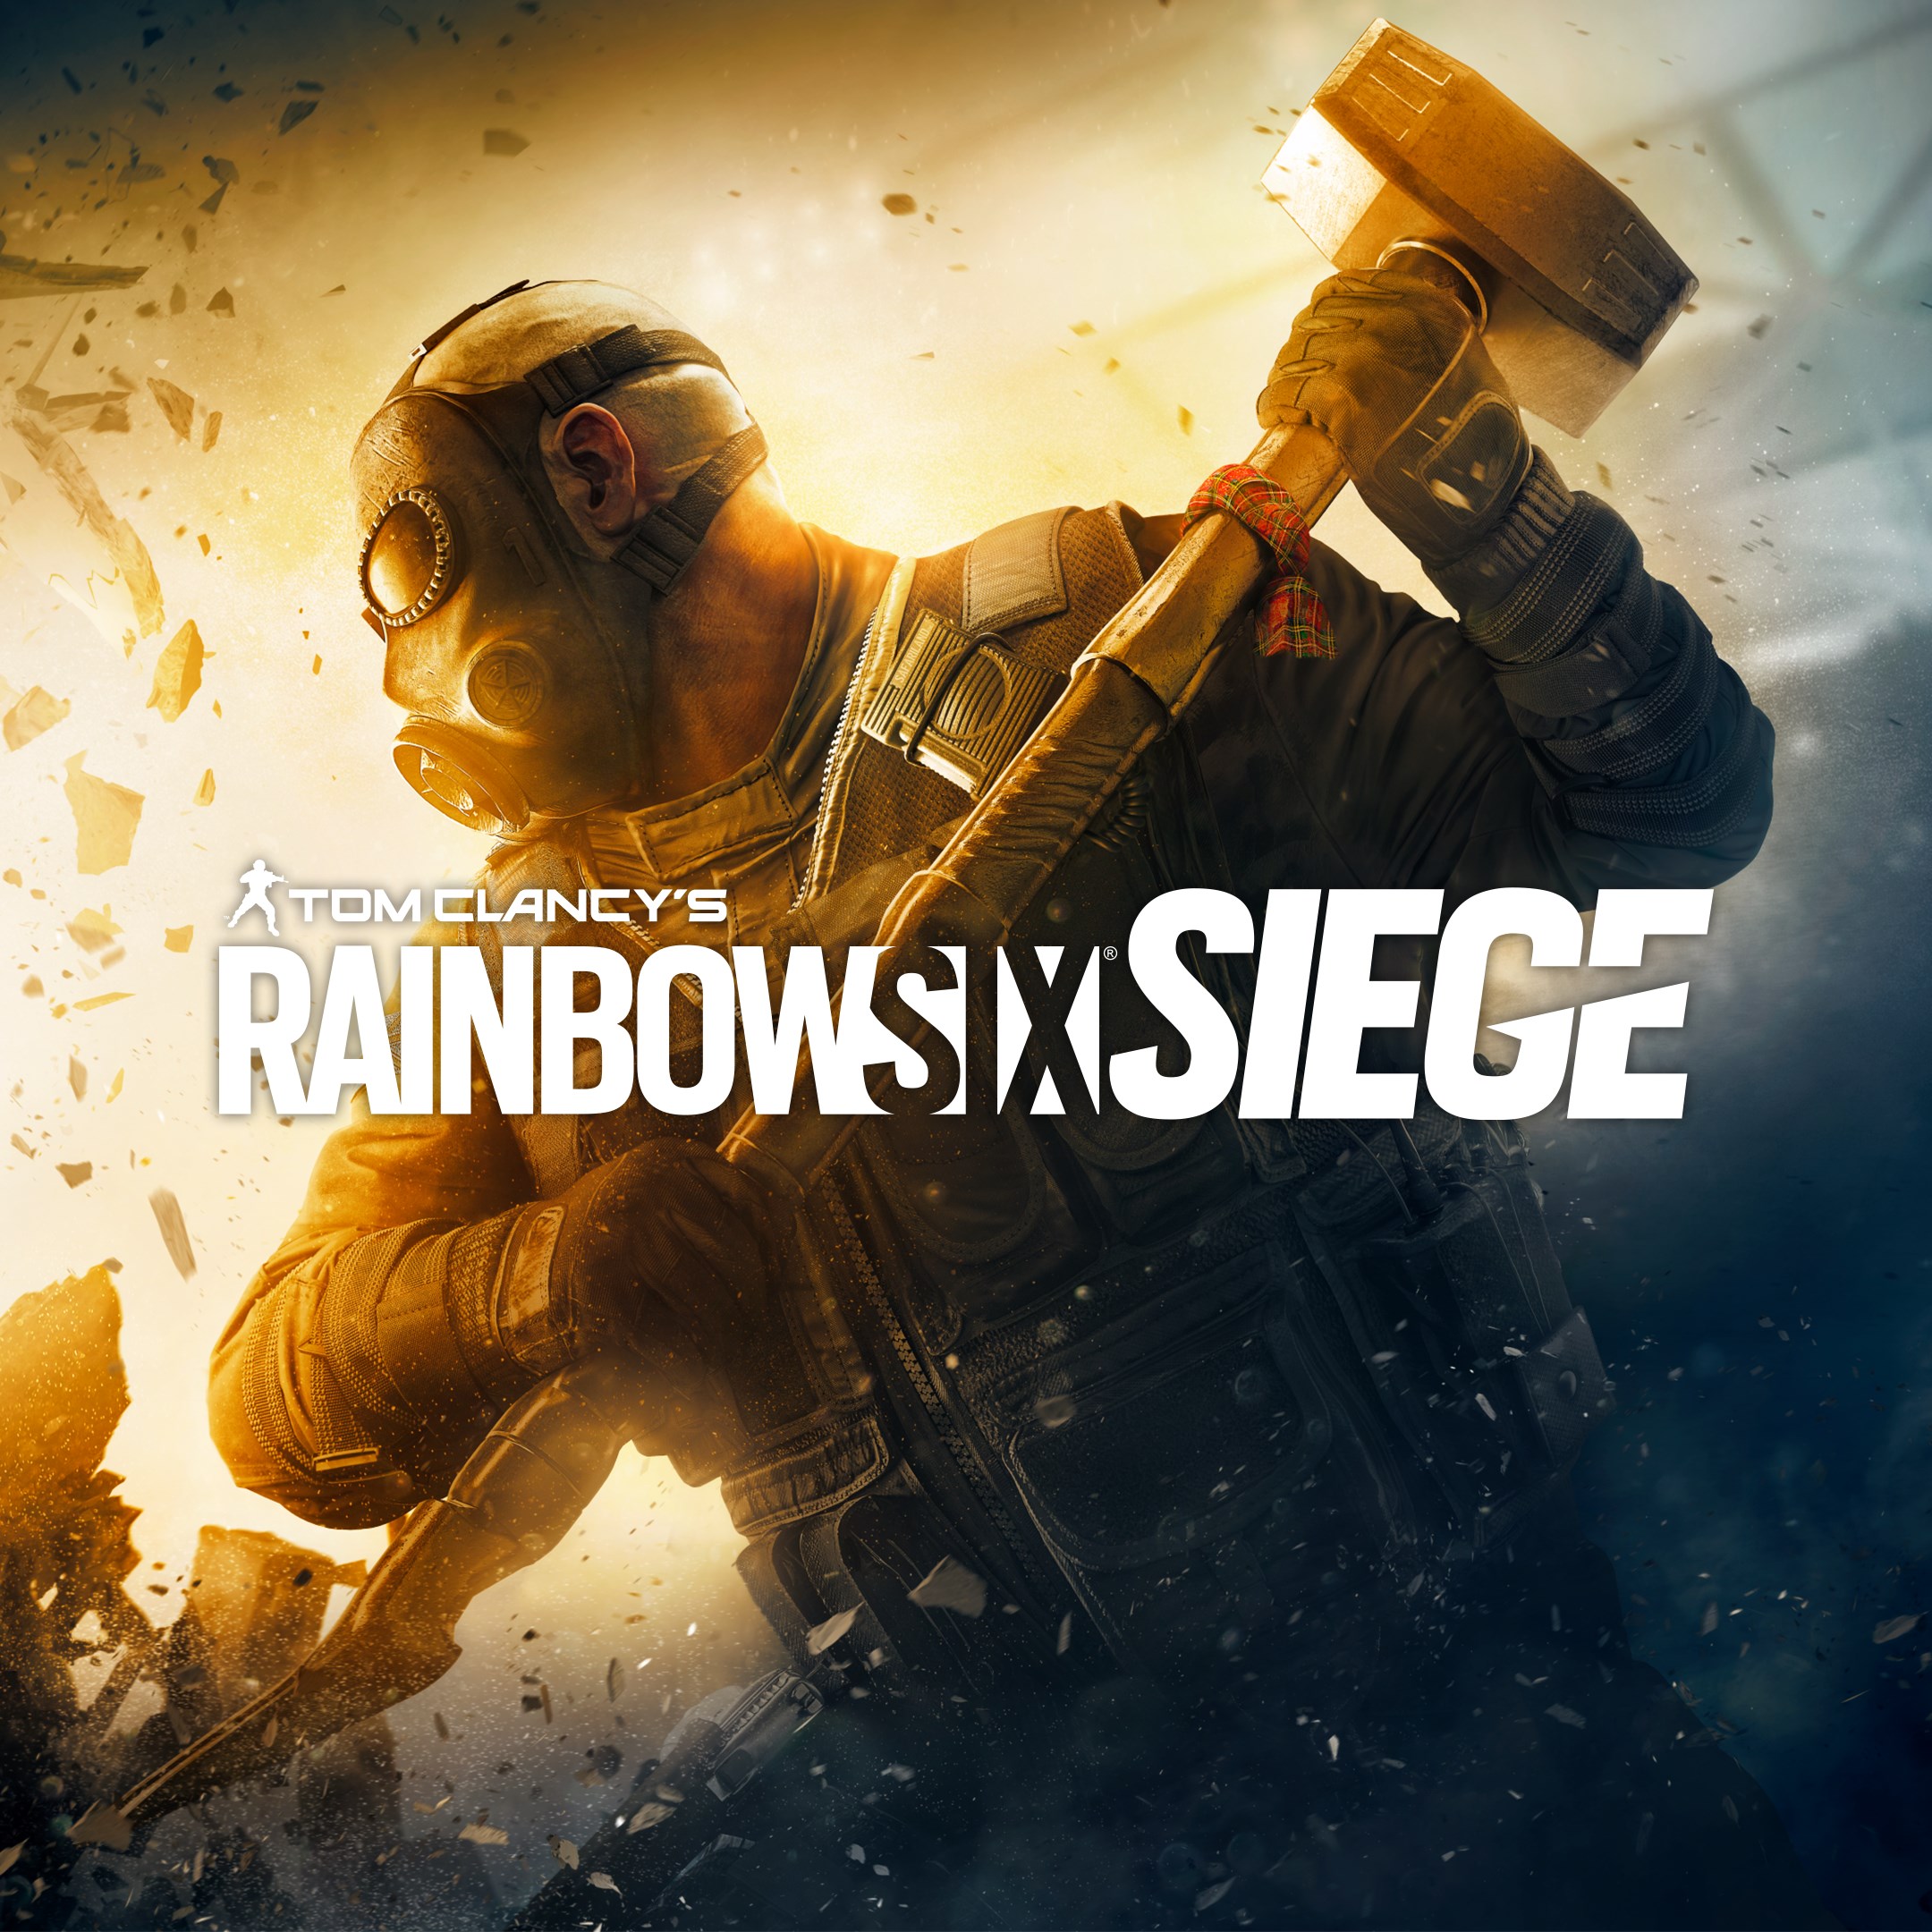 Tom Clancy's Rainbow Six Siege and The Elder Scrolls Online are free to